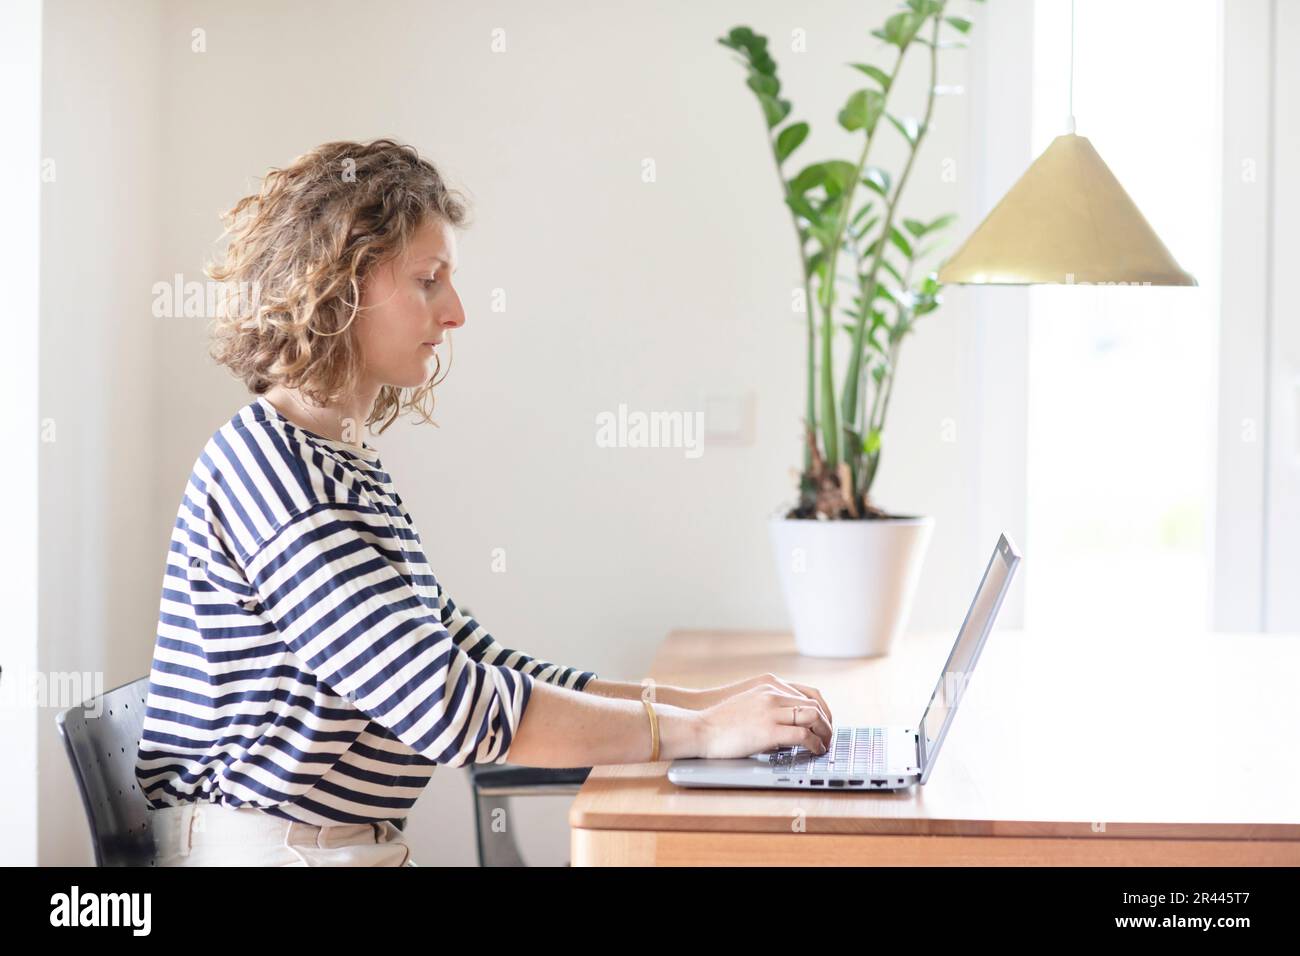 young woman typing in home office with laptop Stock Photo